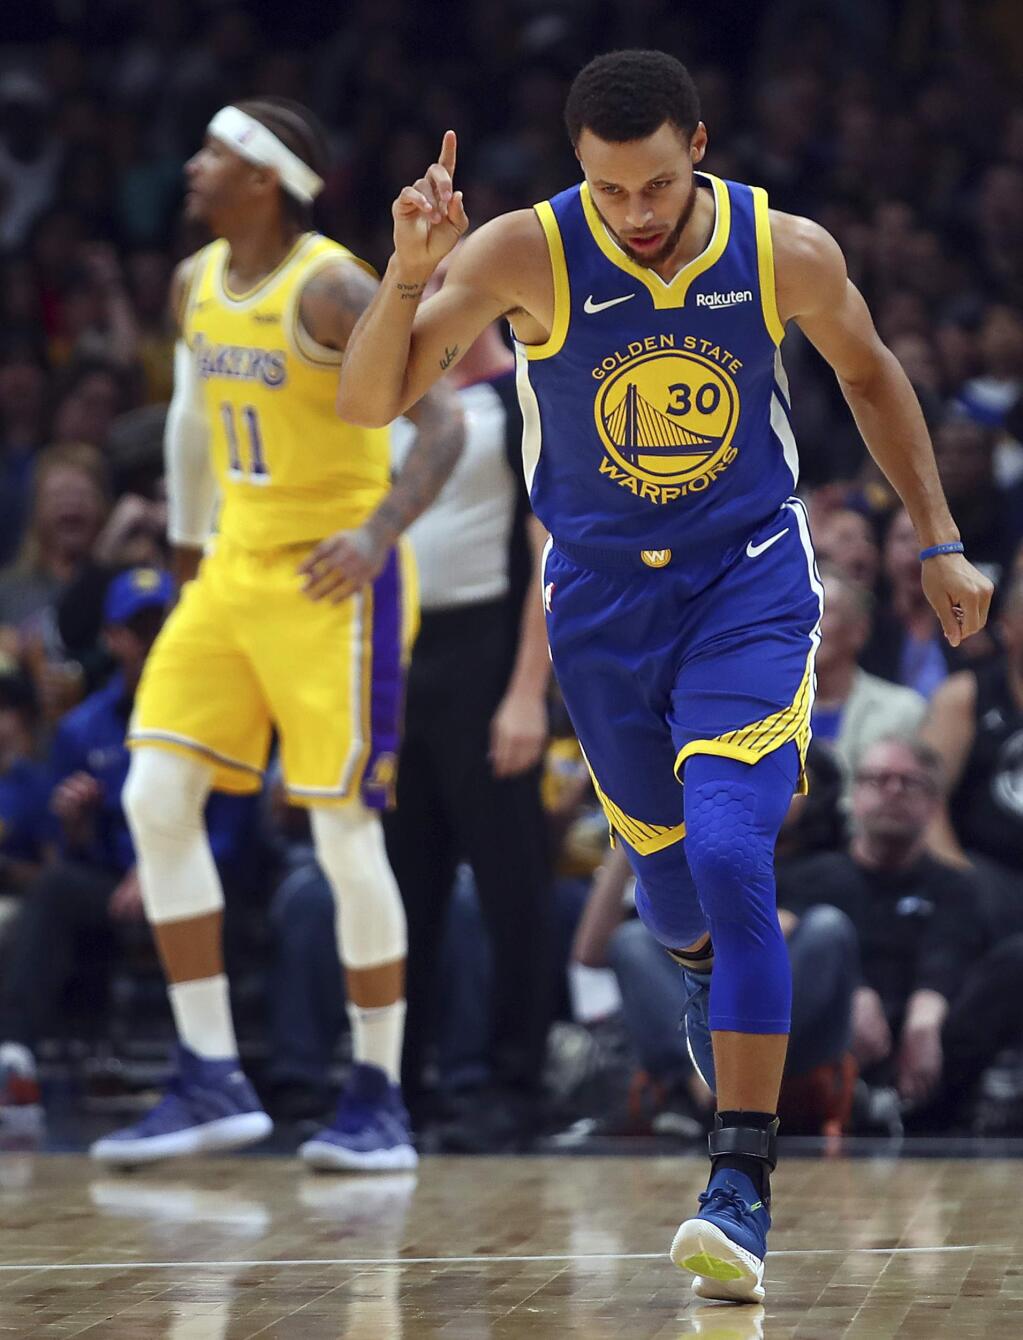 The Golden State Warriors' Stephen Curry, right, celebrates a score against the Los Angeles Lakers during the first half of a preseason game Friday, Oct. 12, 2018, in San Jose. (AP Photo/Ben Margot)